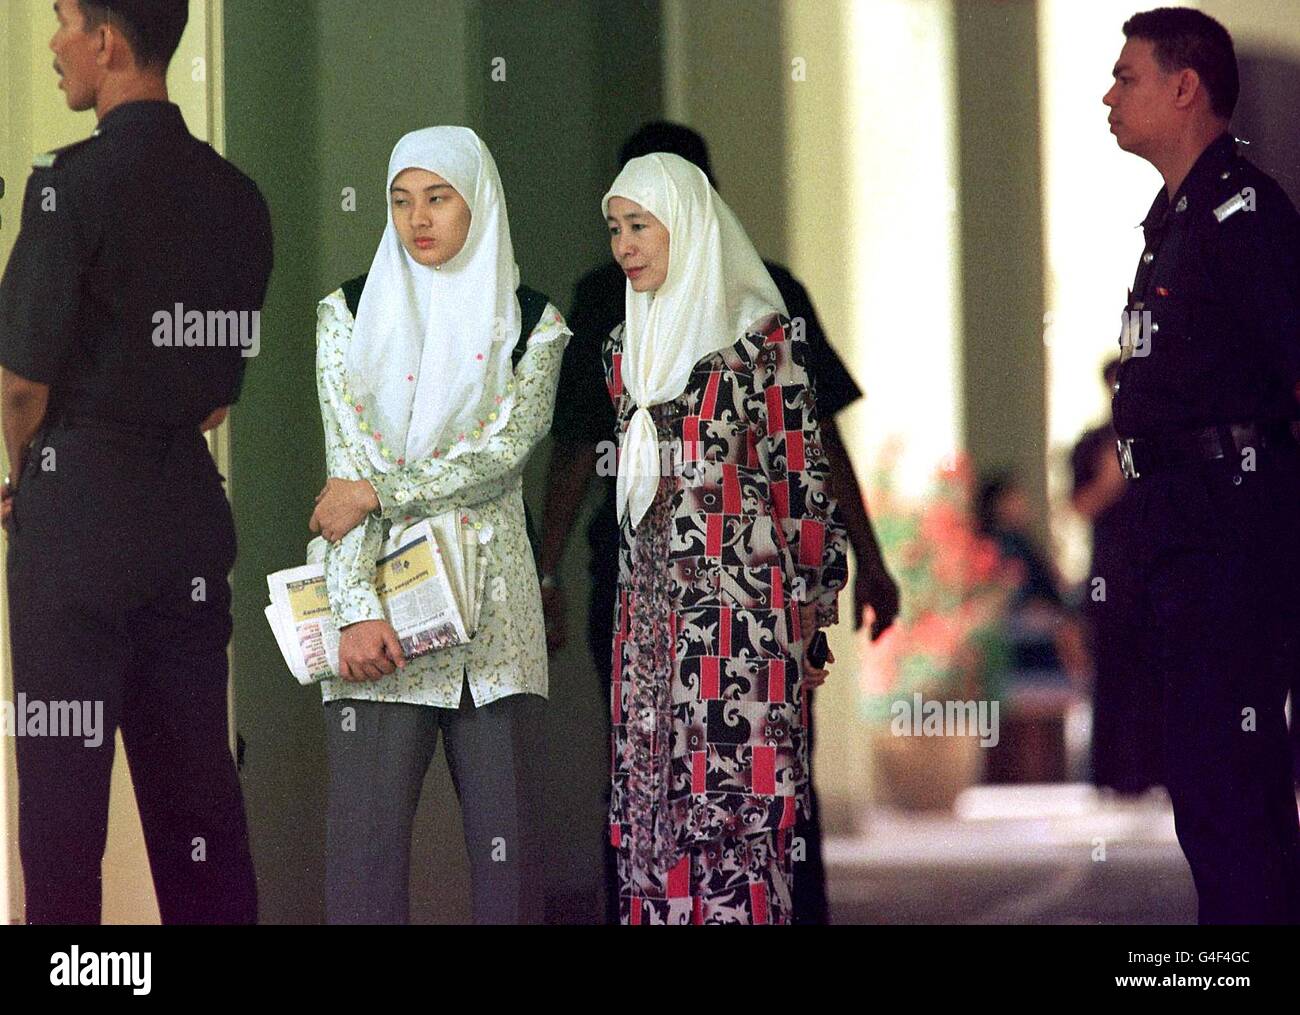 The wife of former premier Anwar Ibrahim, Wan Azizah Wan Ismail (second from R) and daughter Nurul Izzah wait at the corridor of the court house 03 November in Kuala Lumpur. Anwar was set to enter its second day with the United States leading pressure for international observers to be given better access to the proceedings. AFP PHOTO/CHAN LOOI TAT Stock Photo